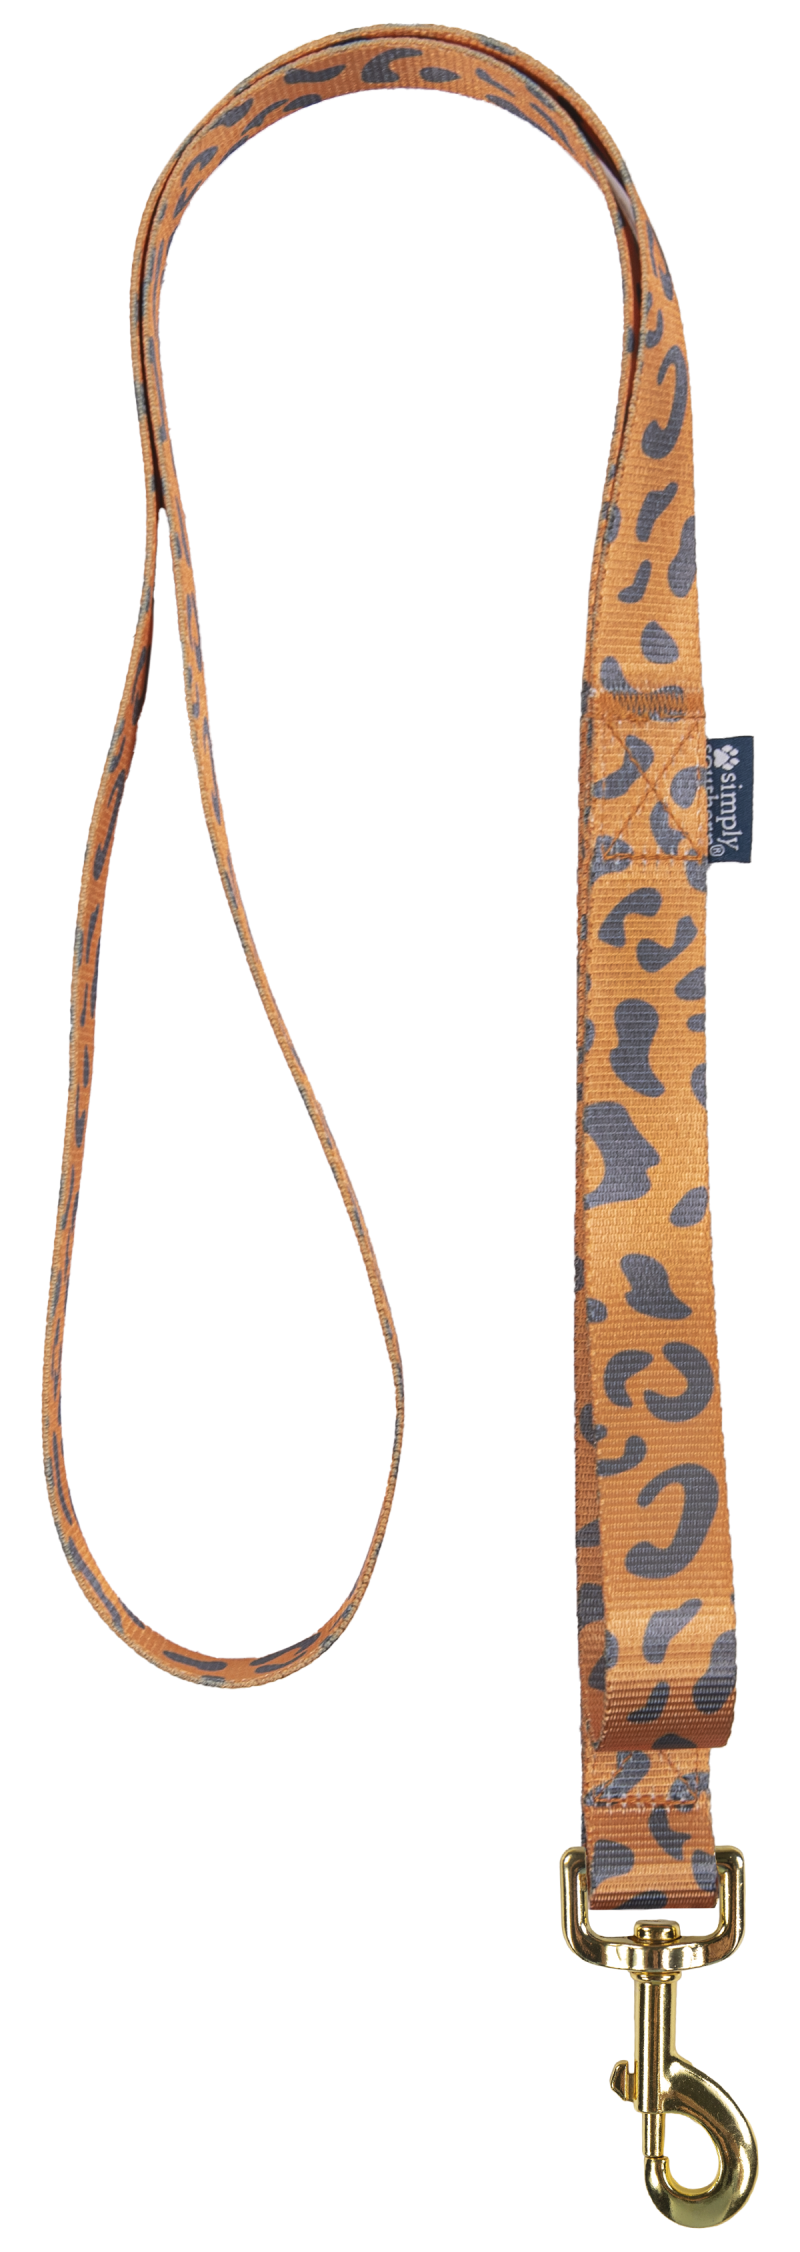 Simply Southern leash